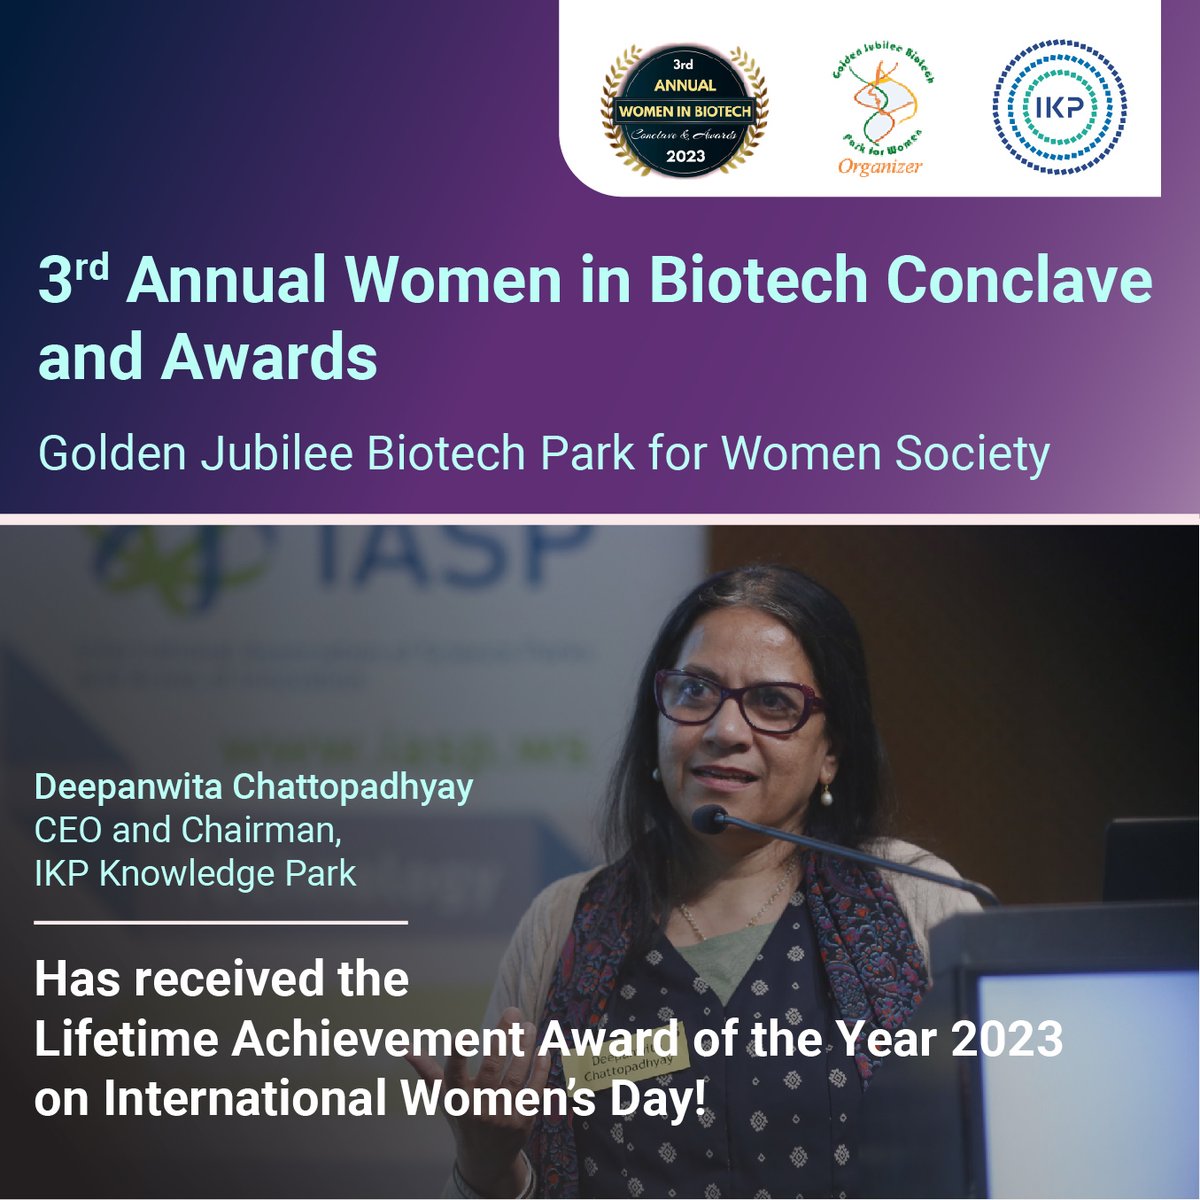 Congratulations to our CEO and Chairman, Deepanwita Chattopadhyay, for winning the Lifetime Achievement Award at the 3rd annual ‘Women in Biotech Conclave and Awards’! Her phenomenal contributions to the biotech sector have been truly inspirational. #WomenInBiotech #IWD2023